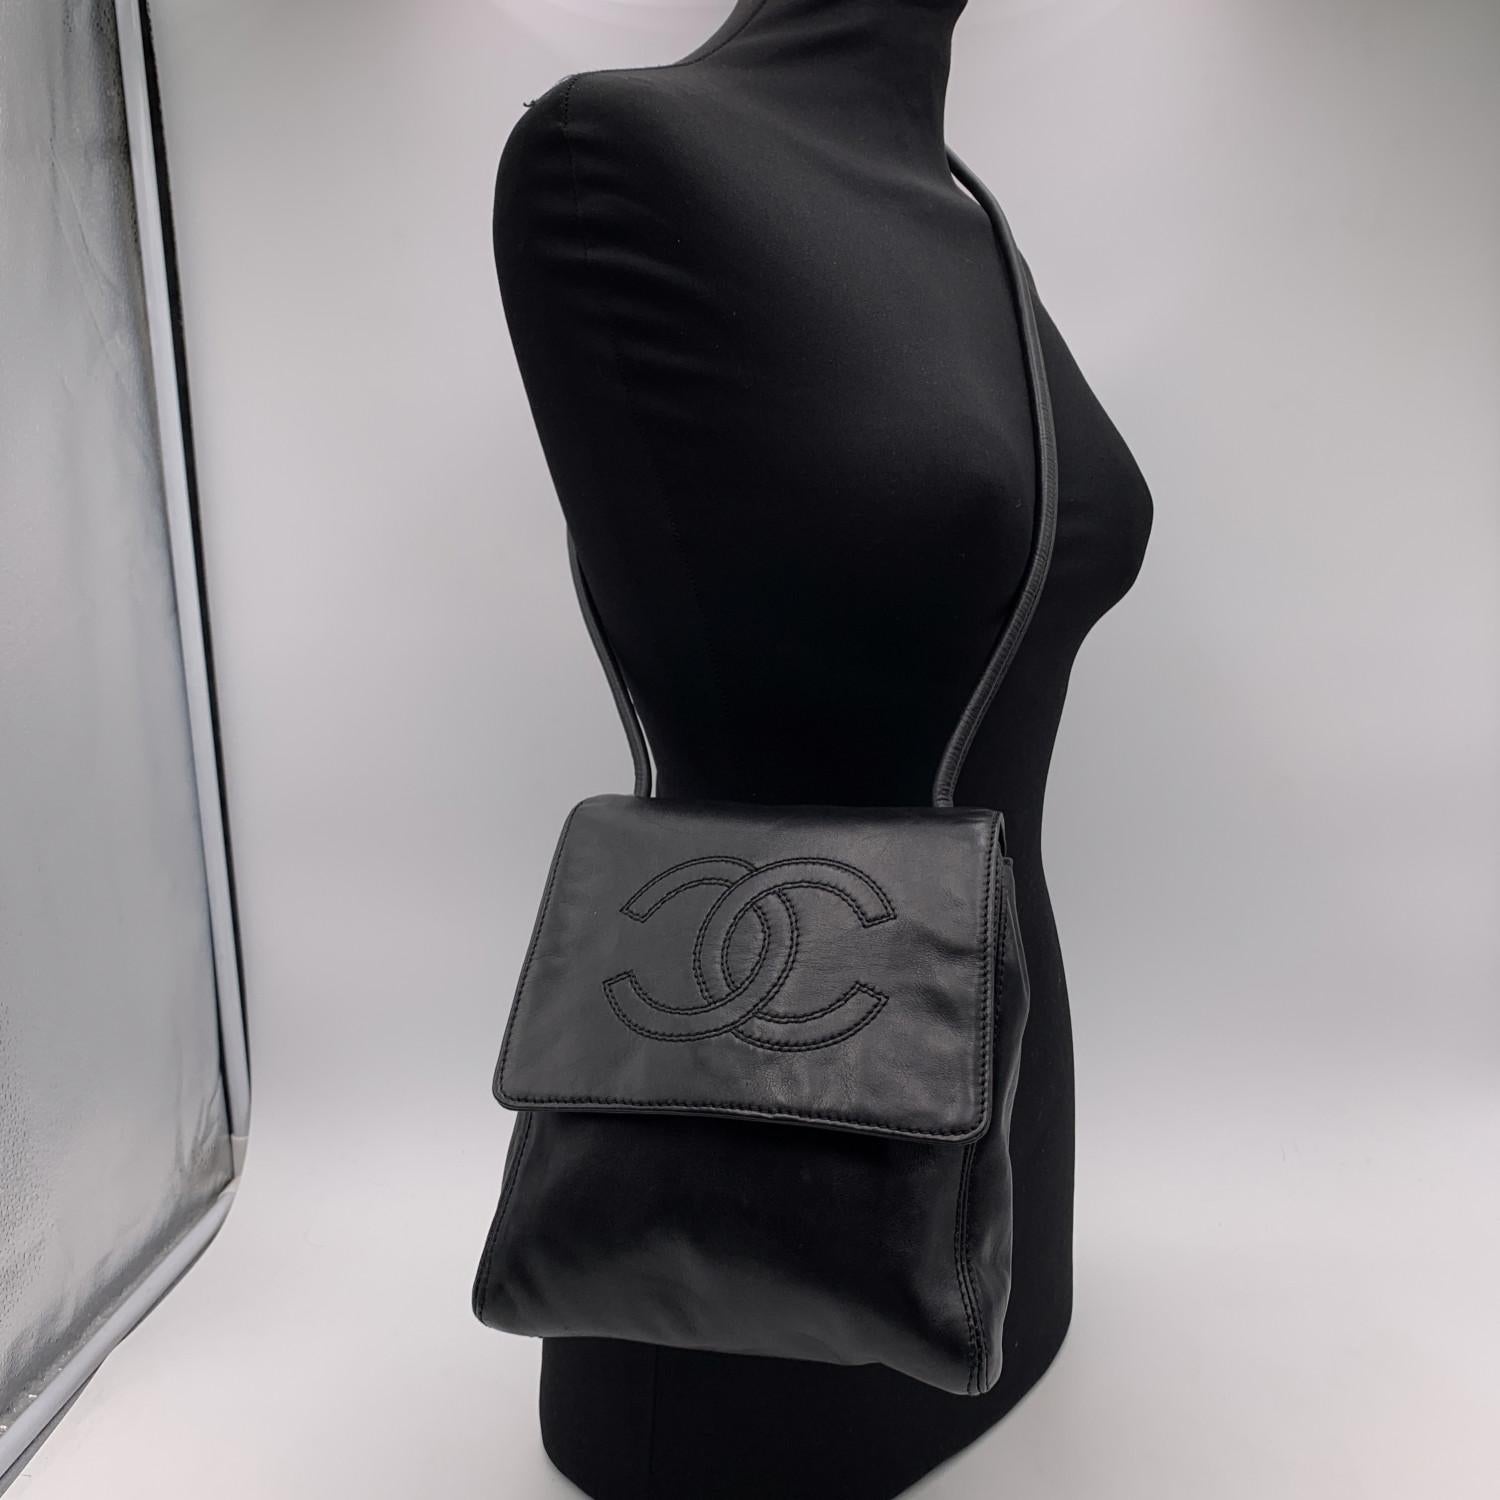 Vintage Chanel black smooth leather shoulder bag. CC - CHANEL logo stitched on the flap. Period/Era: 1997 -1999. It features a front flap with magnetic button closure and a rear open pocket. Black canvas lining with double zip closure. 'CHANEL -